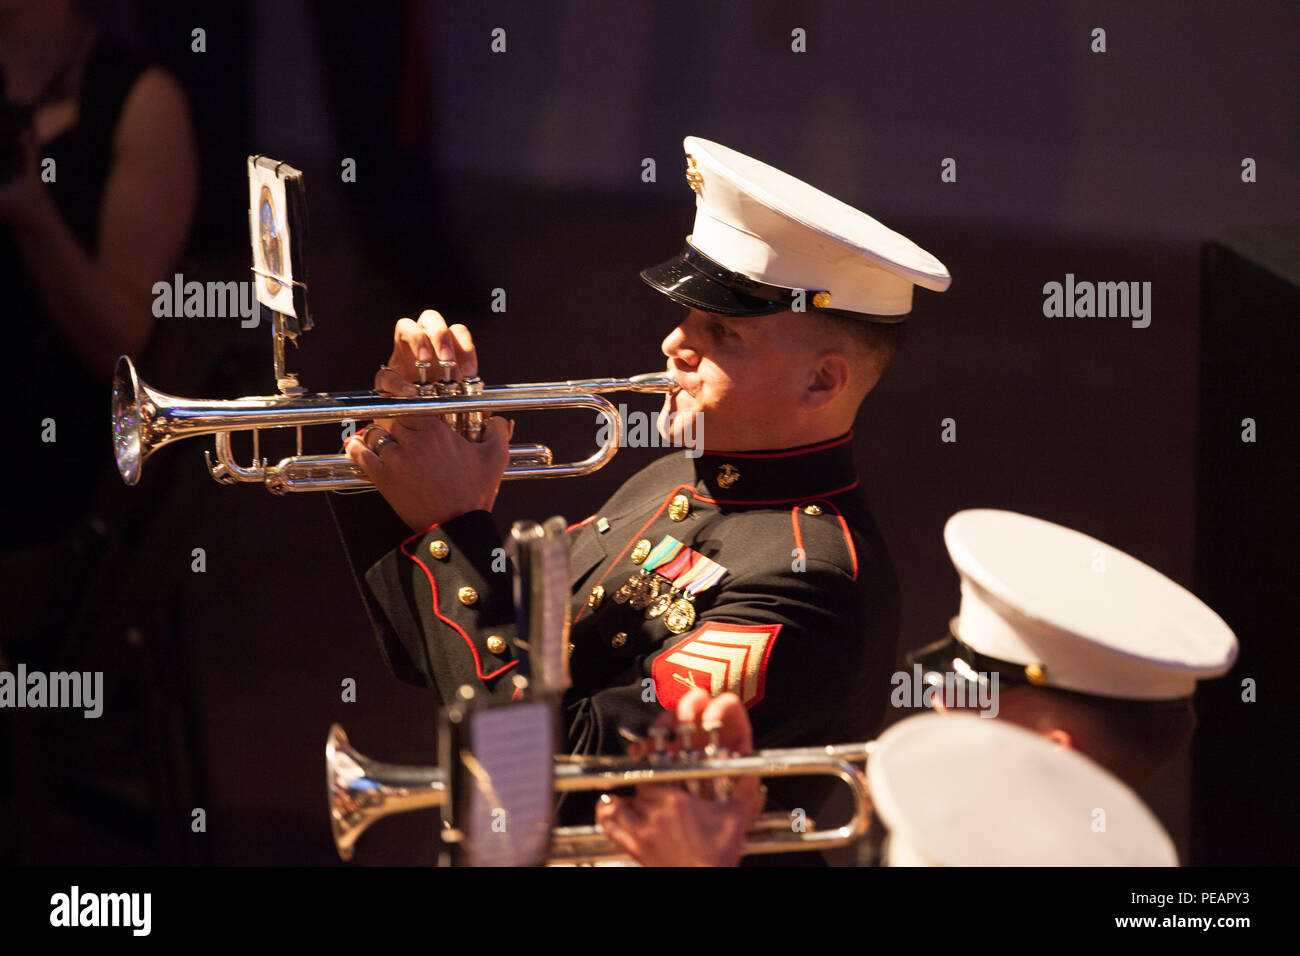 U.S. Marine Sgt. Charles Mekealin, Marine Corps Band New Orleans, plays the trumpet during the band performance for the celebration of the 240th Marine Corps Birthday Ball at Mardi Gras World, New Orleans, La., Nov. 21, 2015. This year’s celebration honors those past, present, and future Marines throughout history and marks the 240th Marine Corps Birthday since its founding on Nov. 10, 1775. (U.S. Marine Corps photo by Kimberly Aguirre/Released) Stock Photo